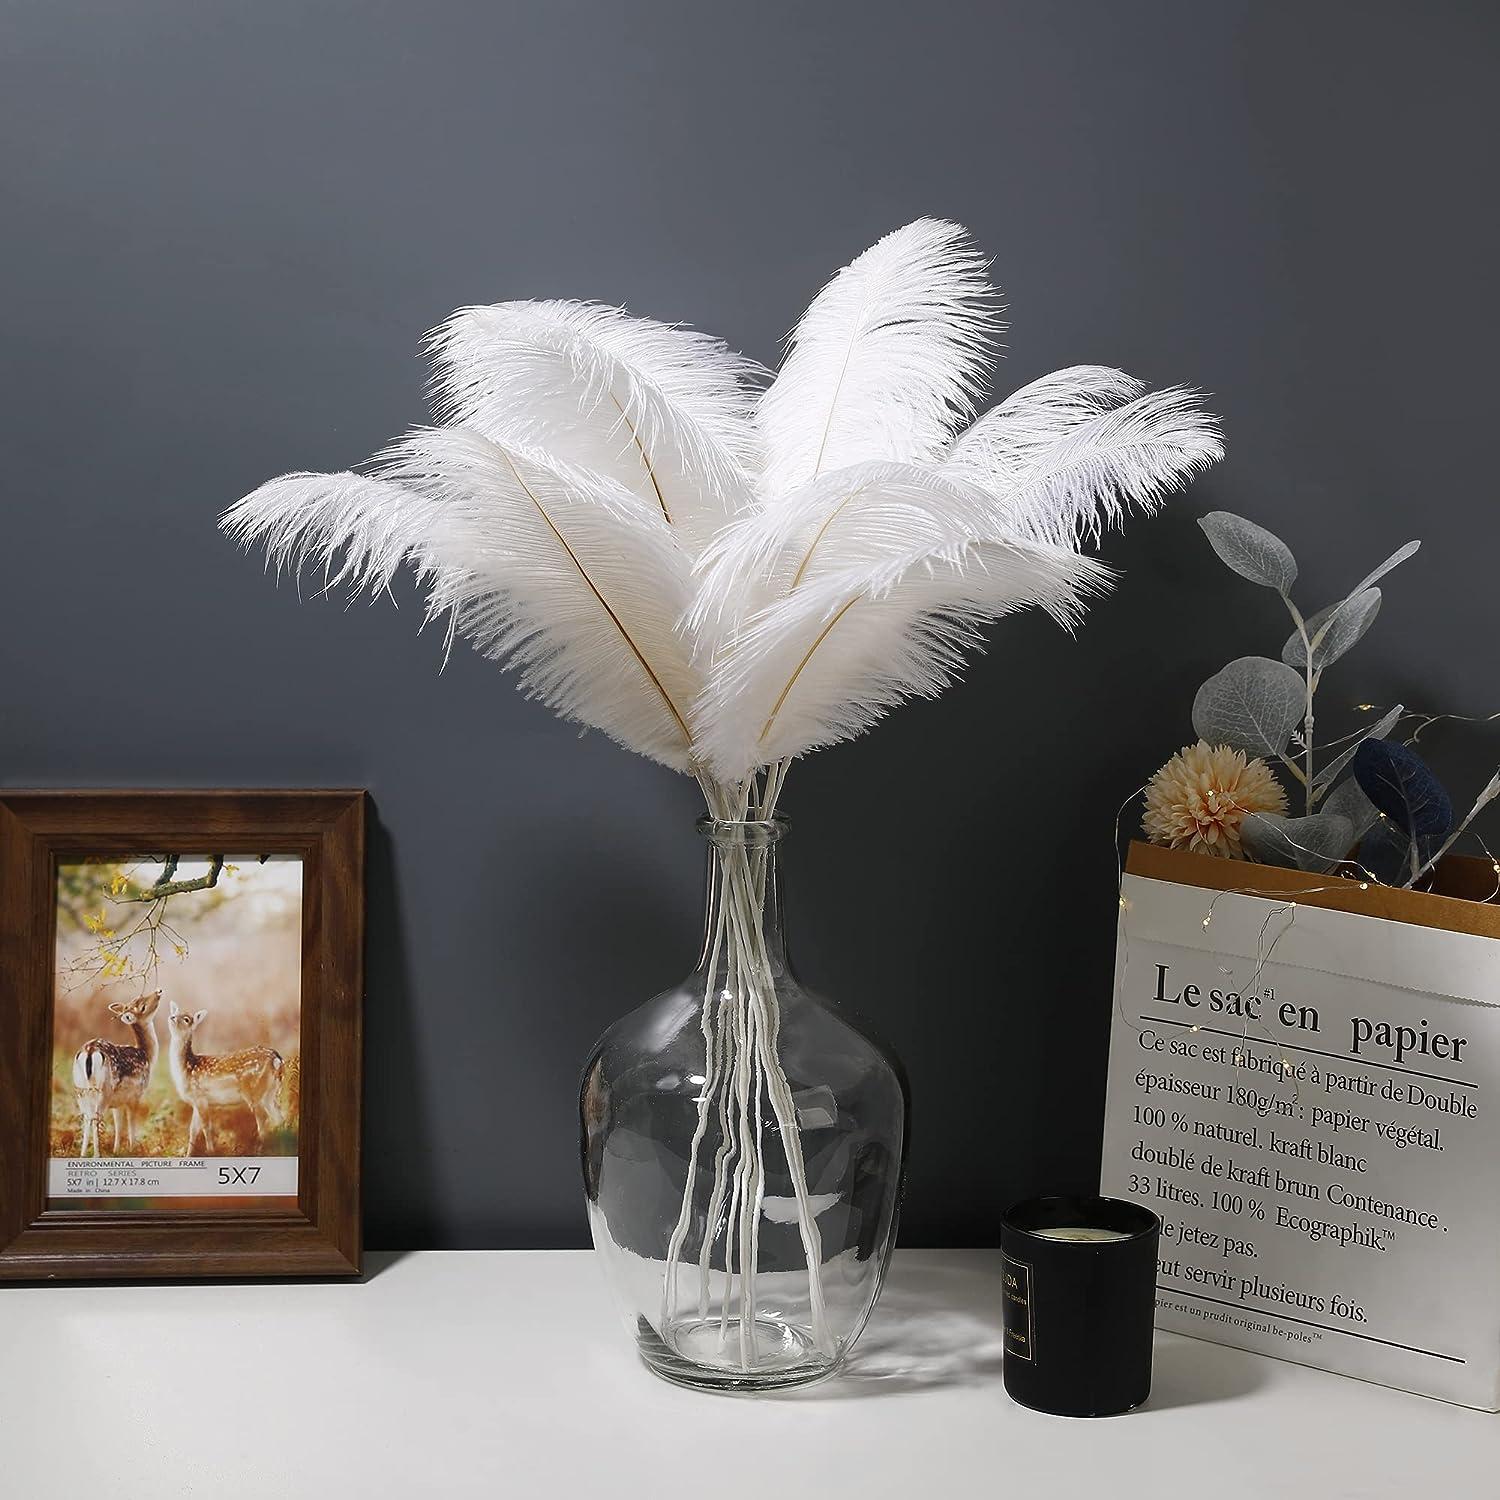 12 MINI Ostrich Feather Centerpiece Kits -   Feather centerpieces, Ostrich  feather centerpieces, Centerpiece kits